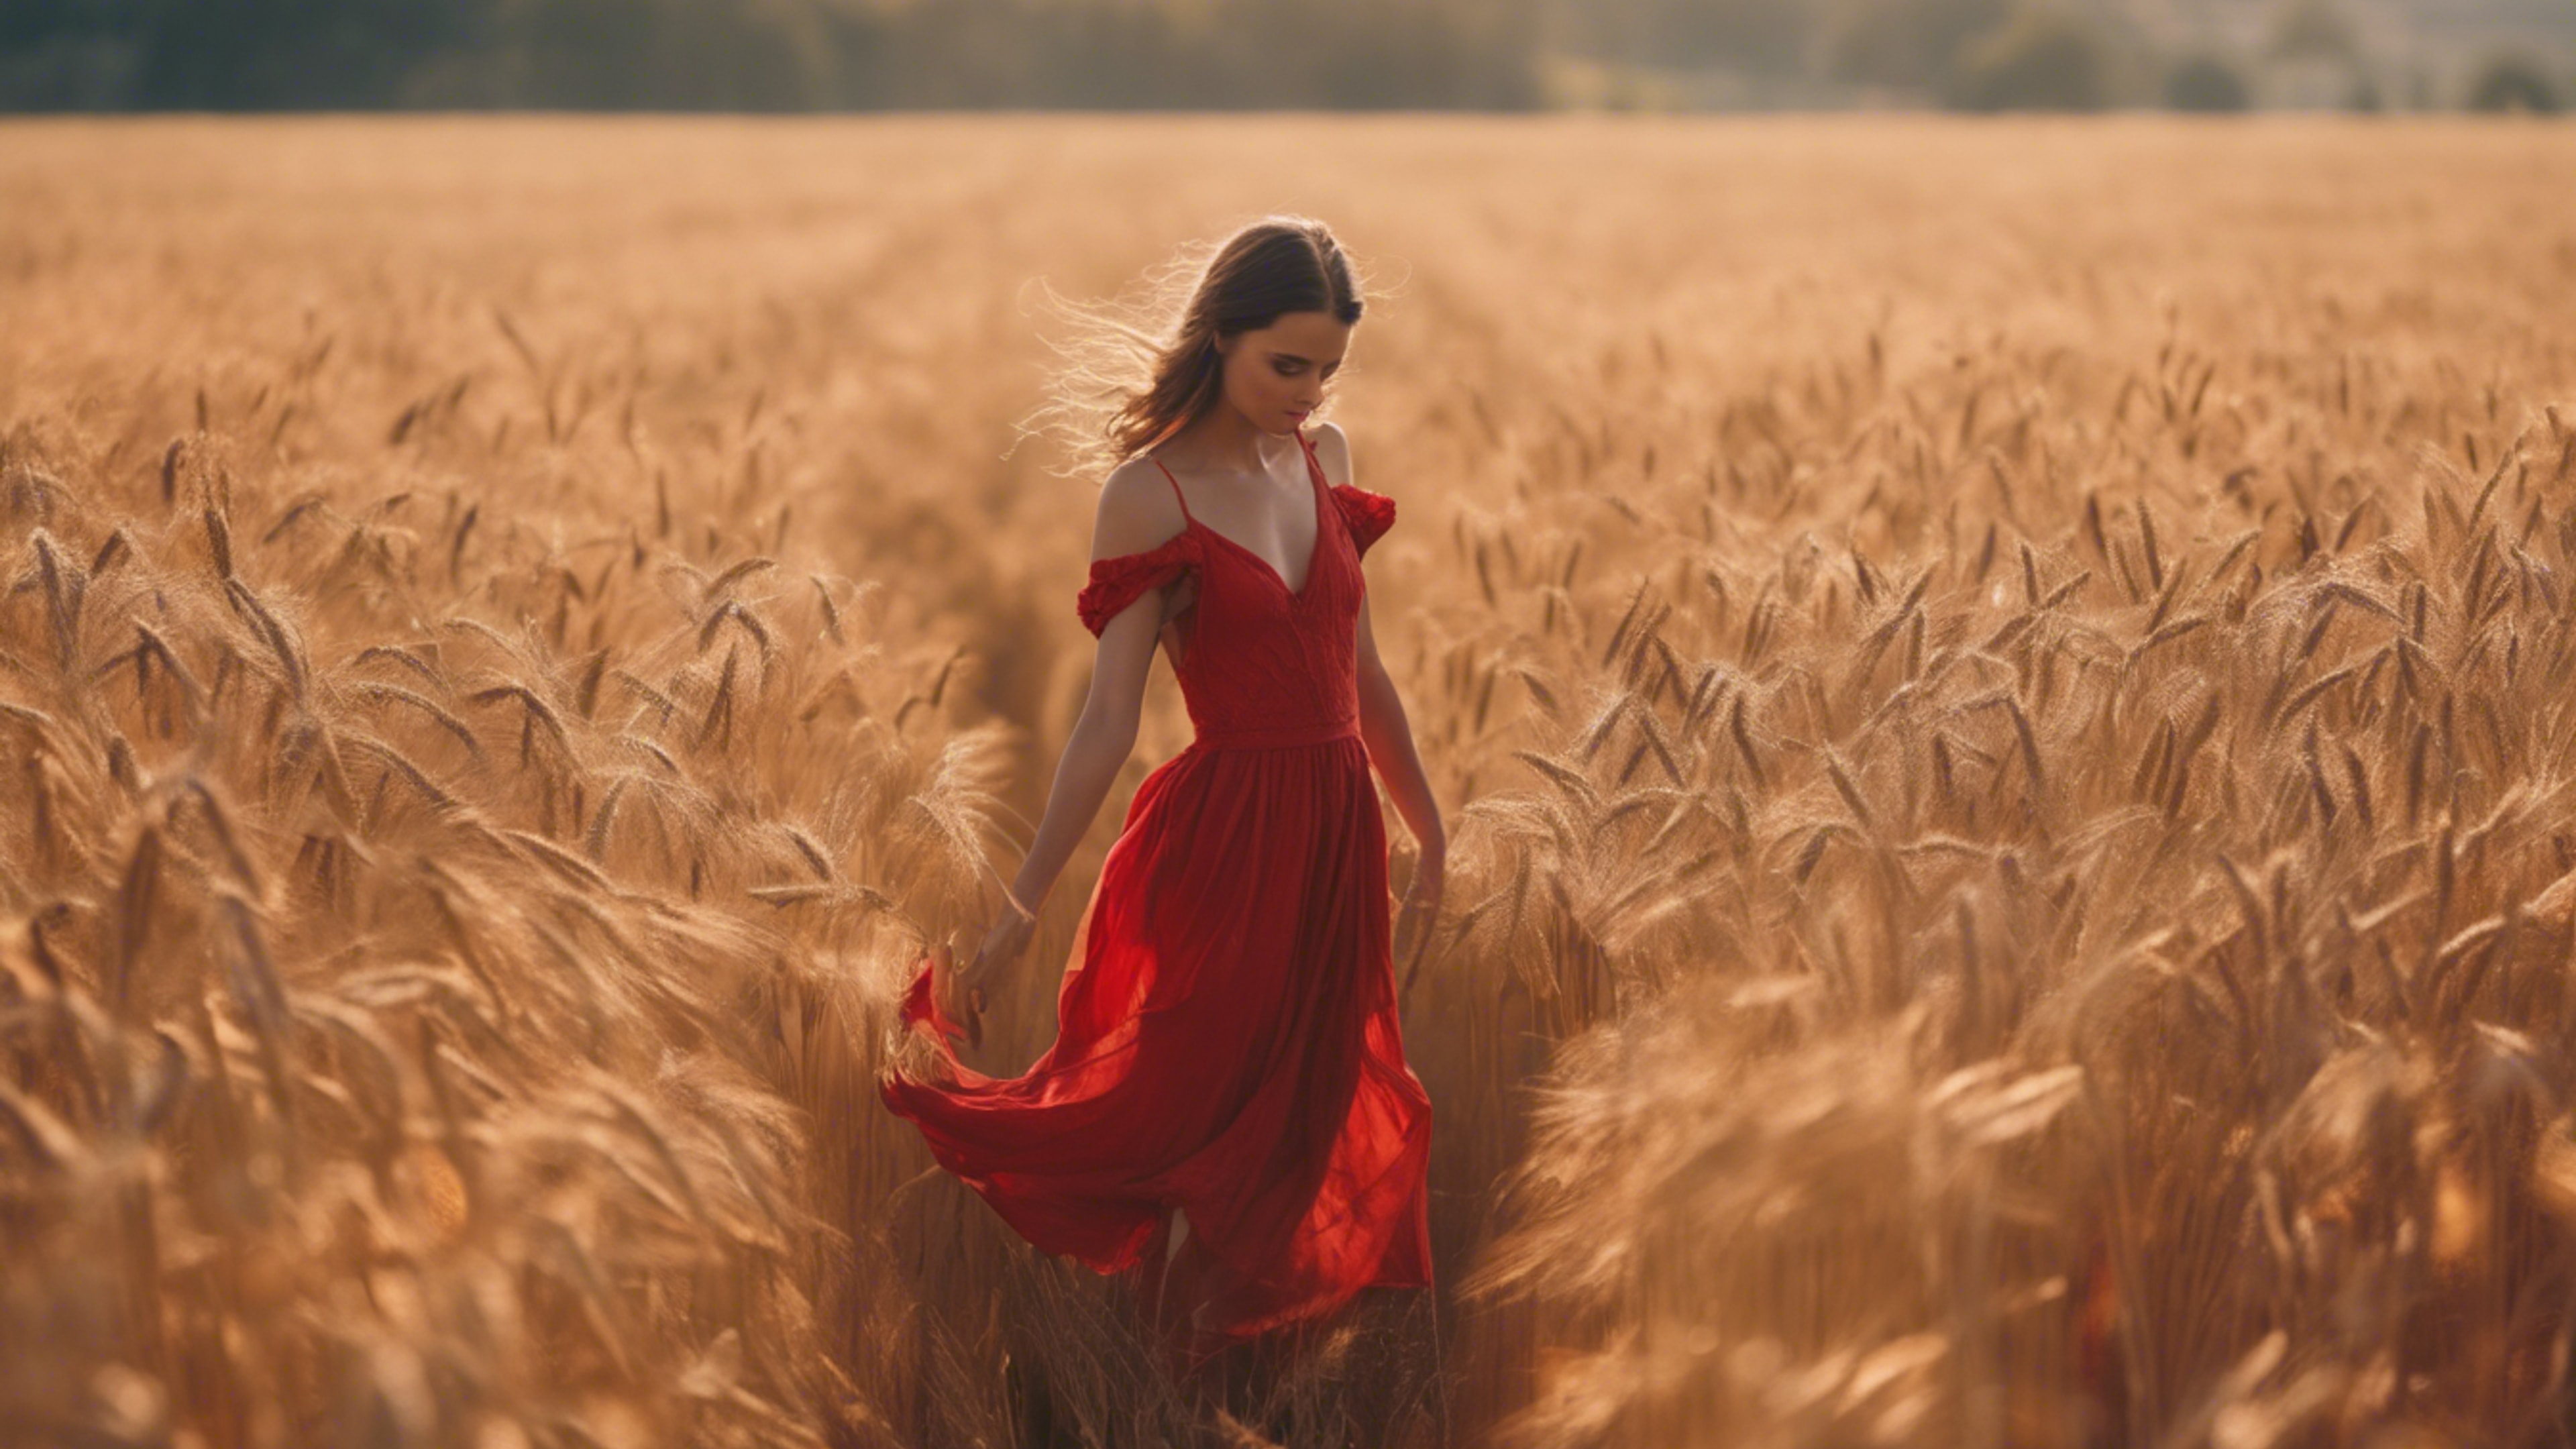 A young girl in a fiery red dress dancing in a golden wheat field. Tapet[3d2bbc59672c41dea075]